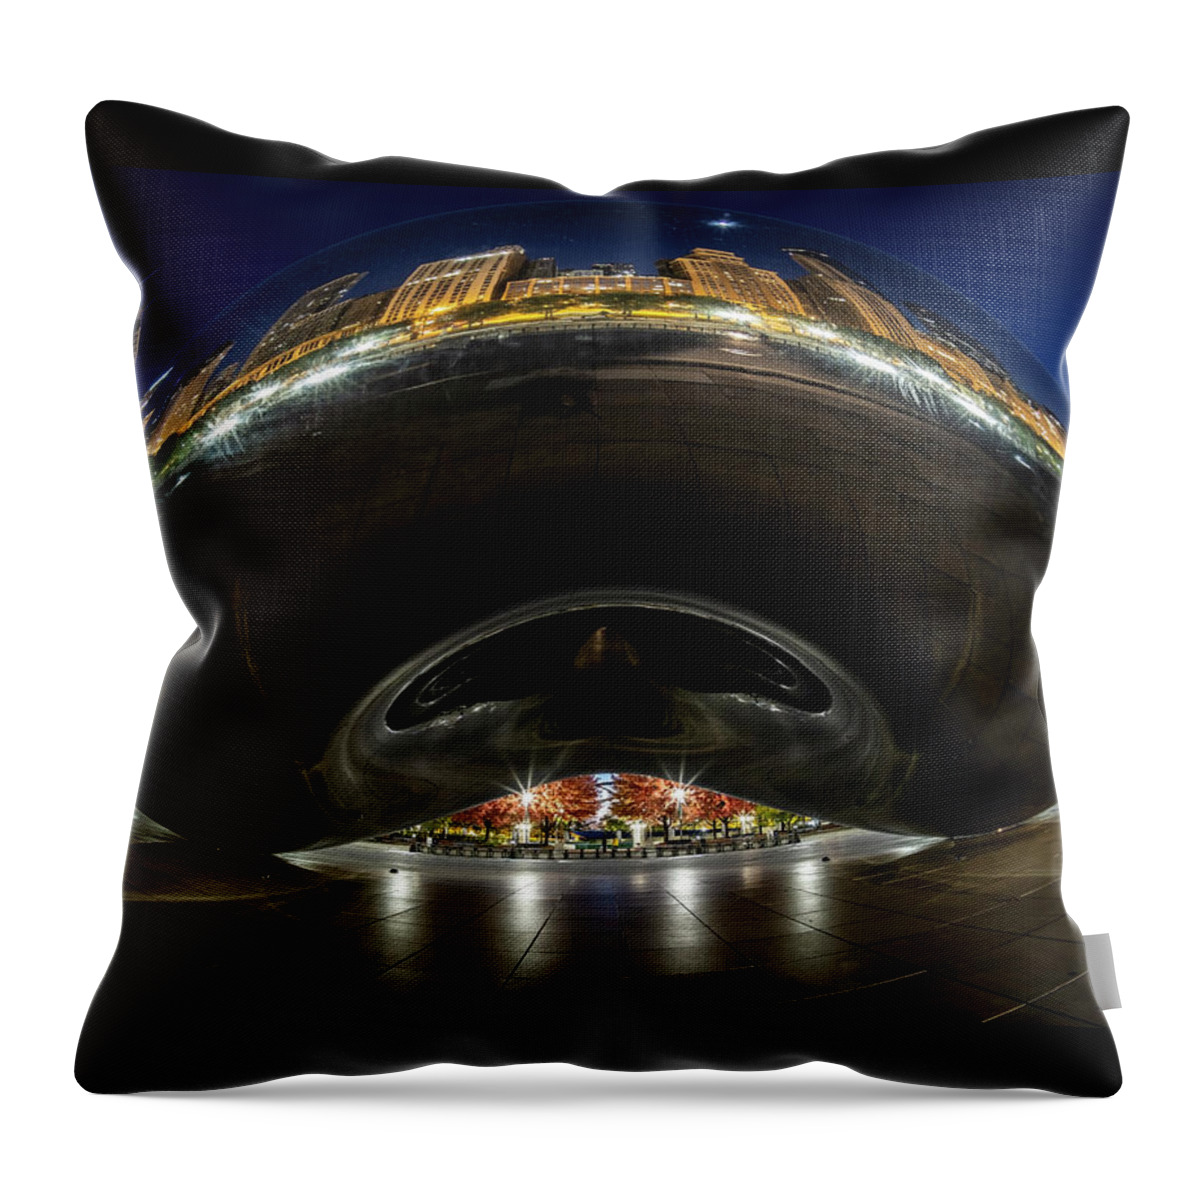 Bean Throw Pillow featuring the photograph A Fisheye perspective of Chicago's Bean by Sven Brogren